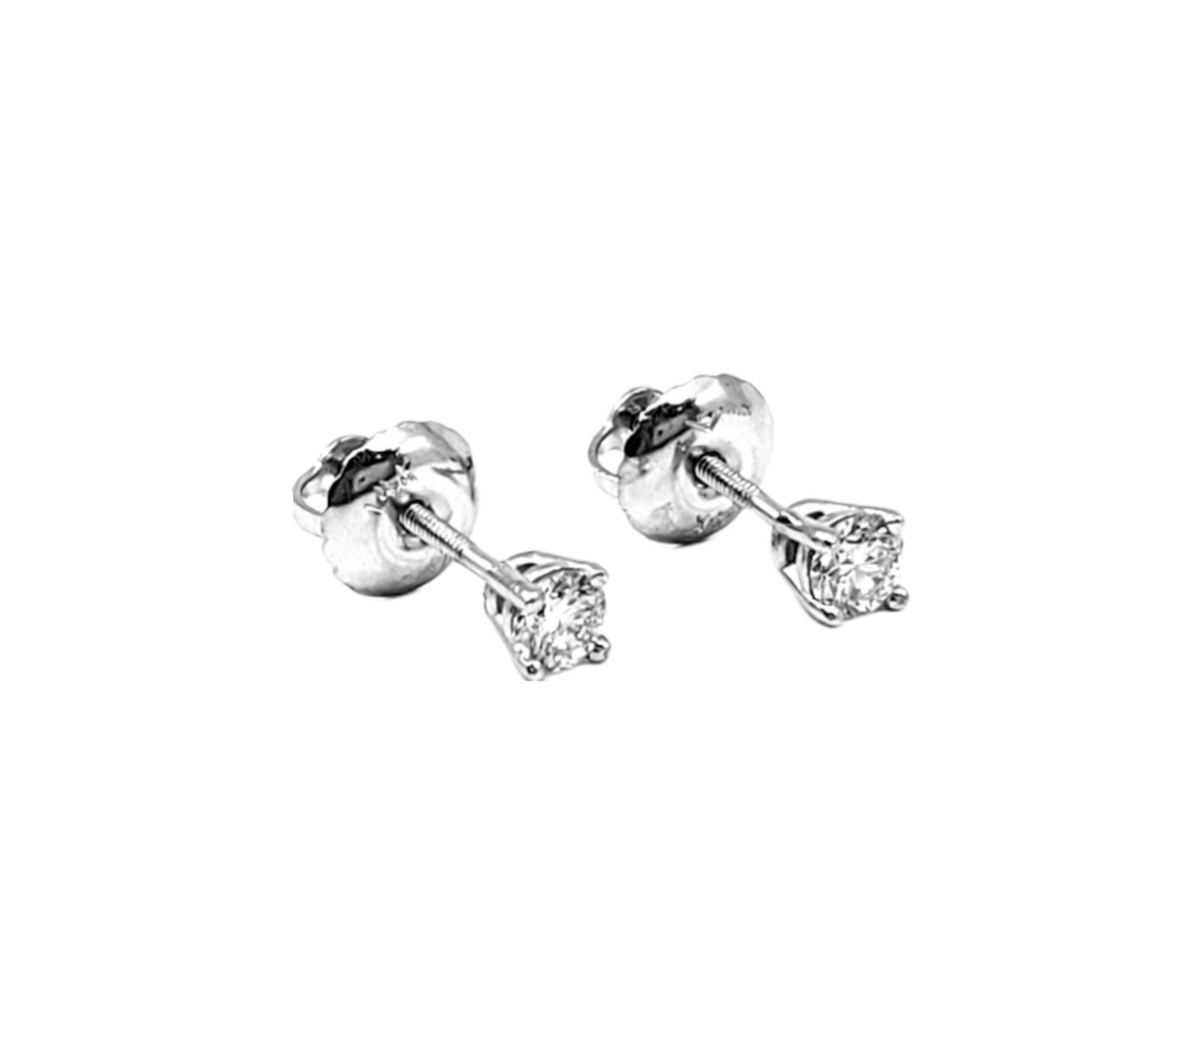 14K White Gold 0.15cttw Lab Grown Diamond Solitaire Earrings with Screw Back